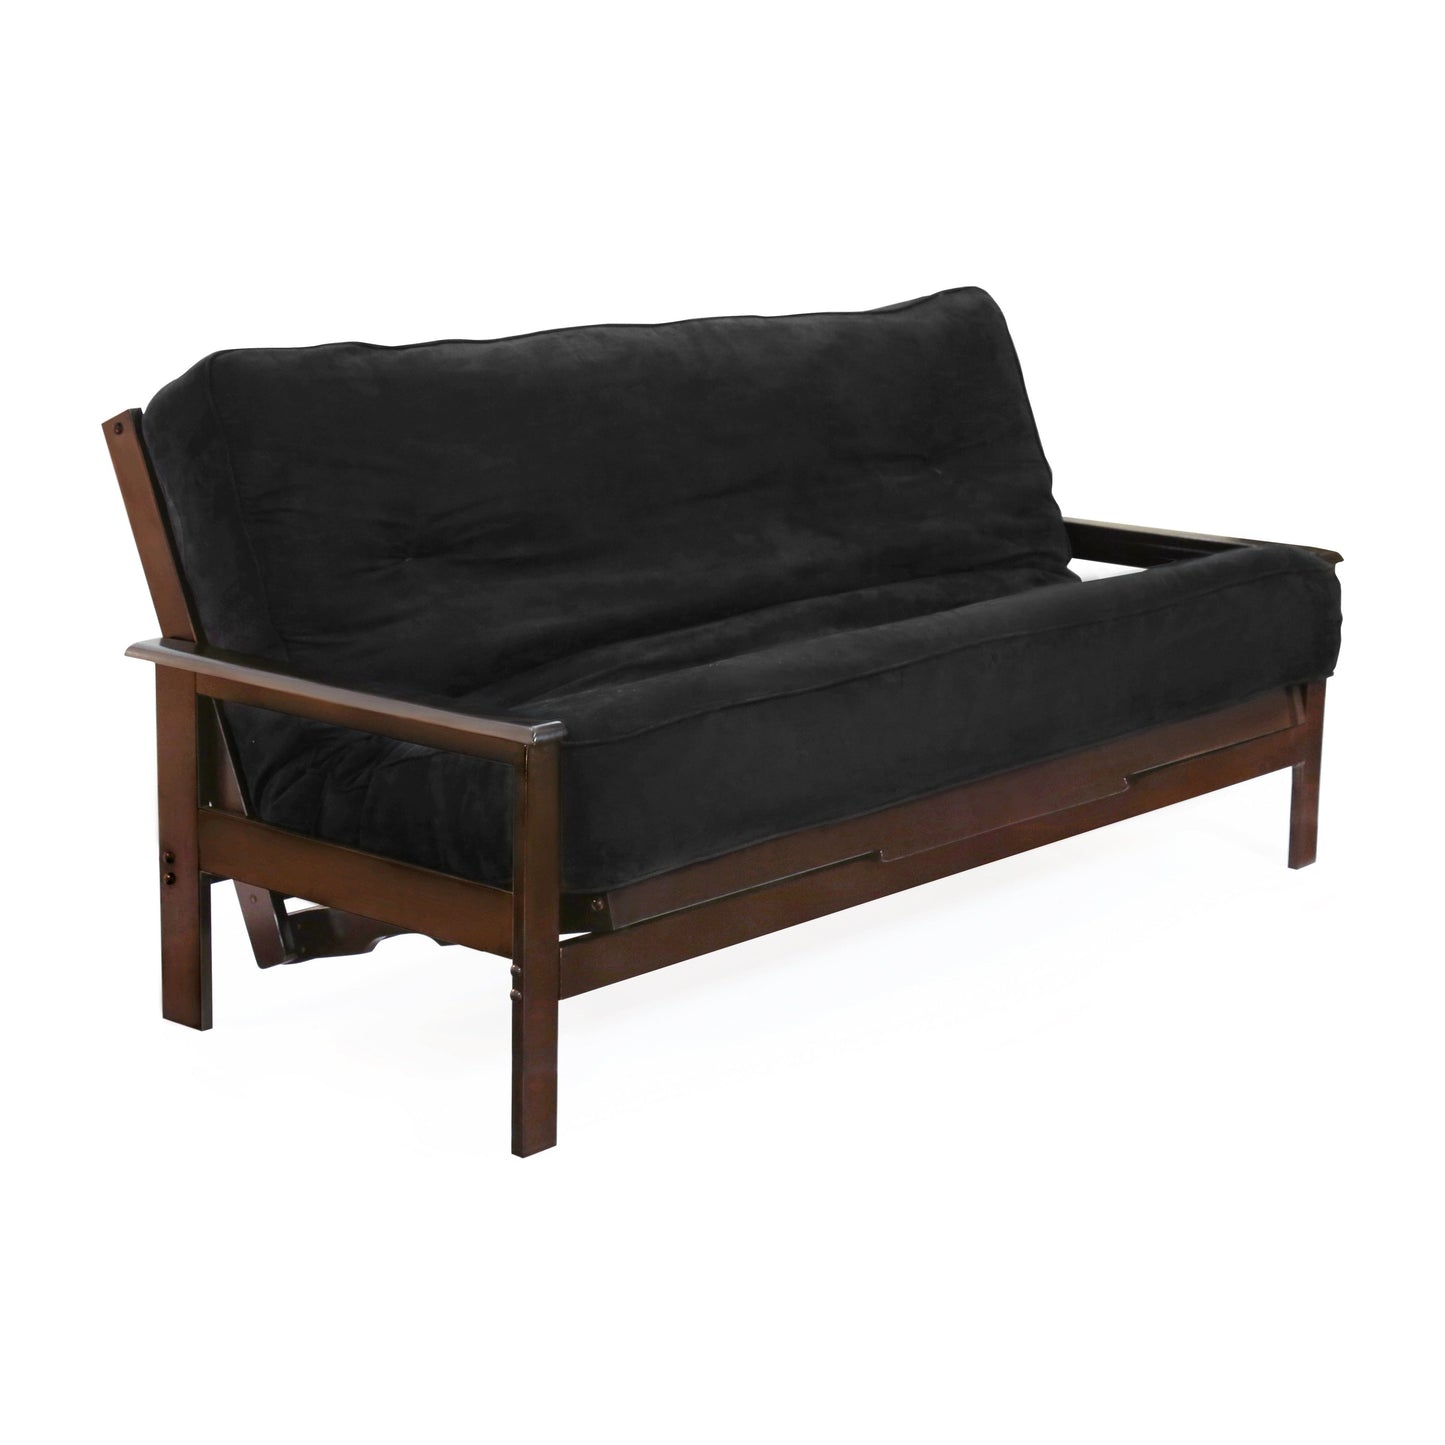 Night and Day Albany Queen Futon Frame in black walnut finish- Frame only Chocolate ABY-BA-BMG-QEN-CHO